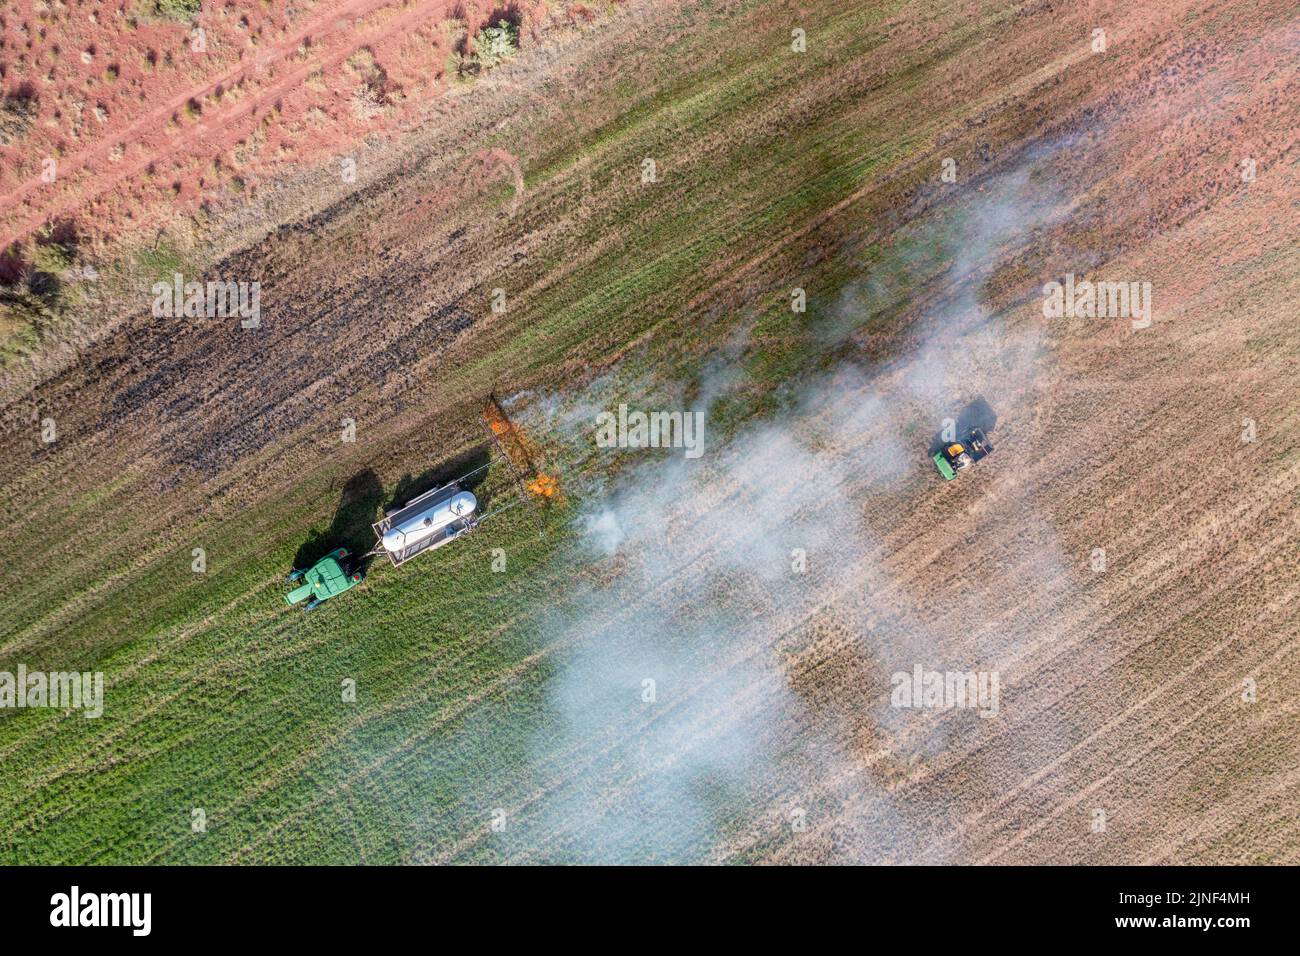 A tractor pulling a propane burner burns weeds in an hayfield after cutting the alfalfa on a ranch in Utah. Stock Photo